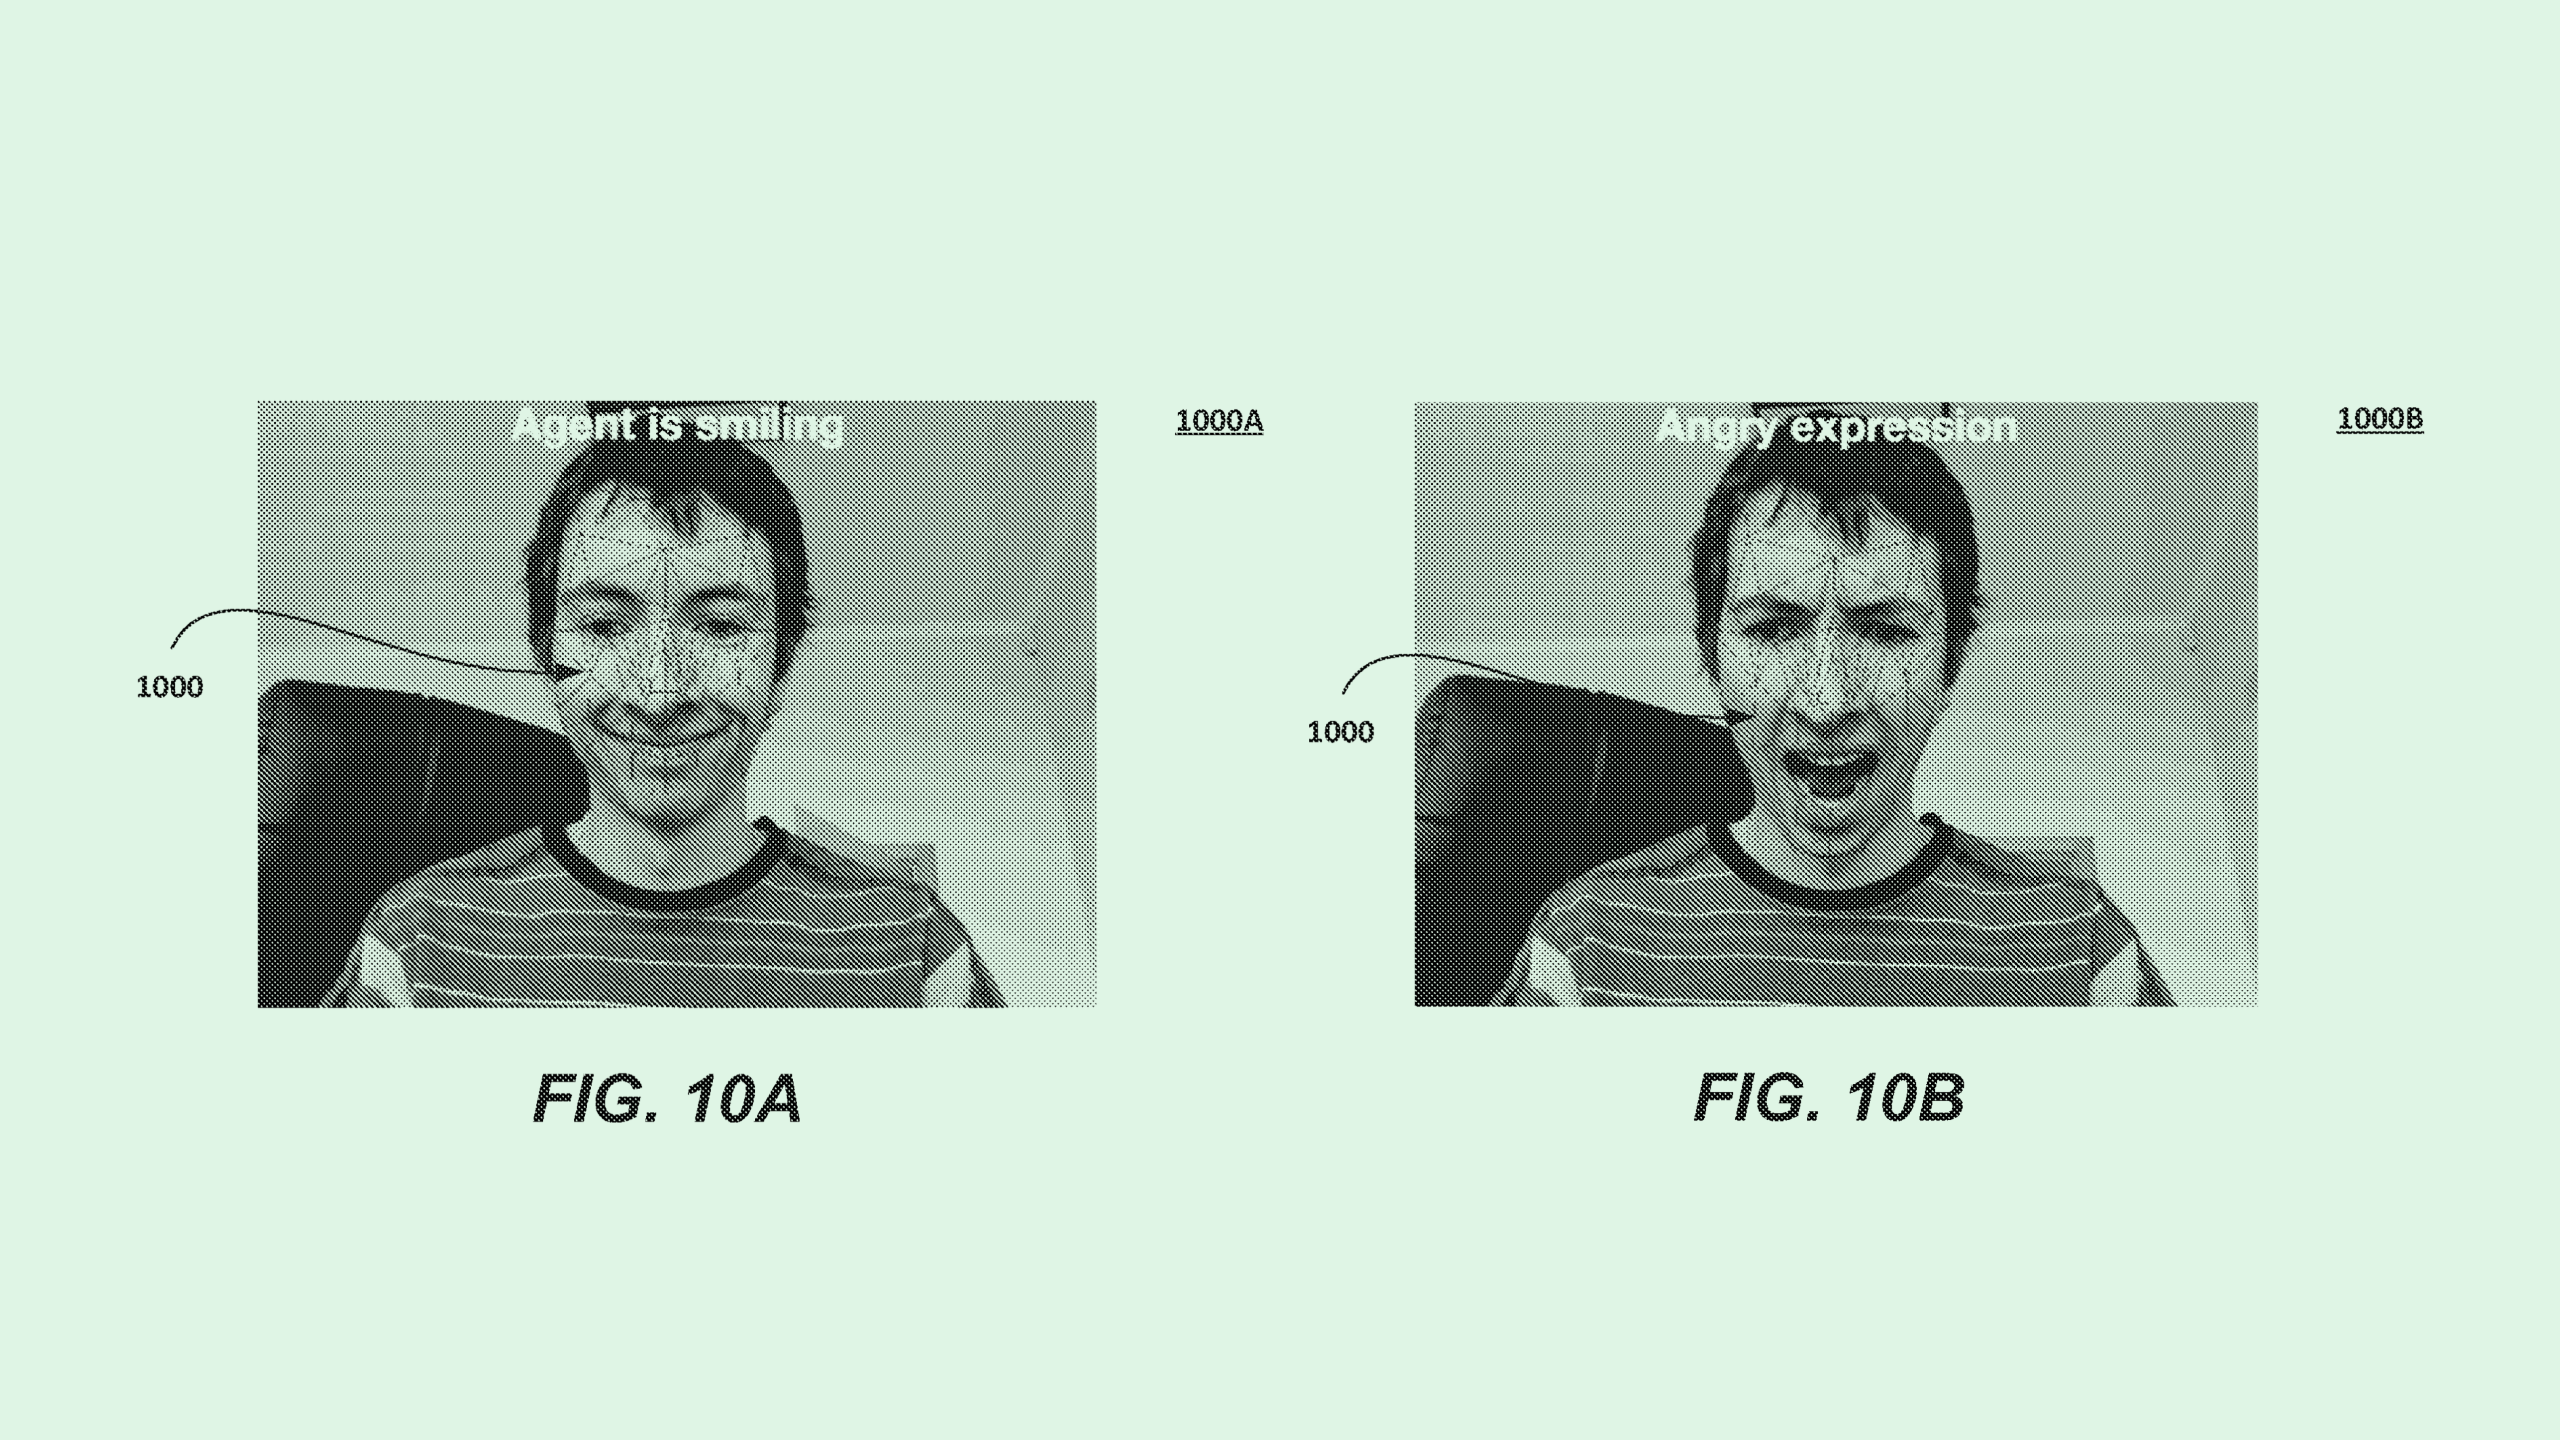 Snap Patent Brings Emotion Detection to Workplace Surveillance